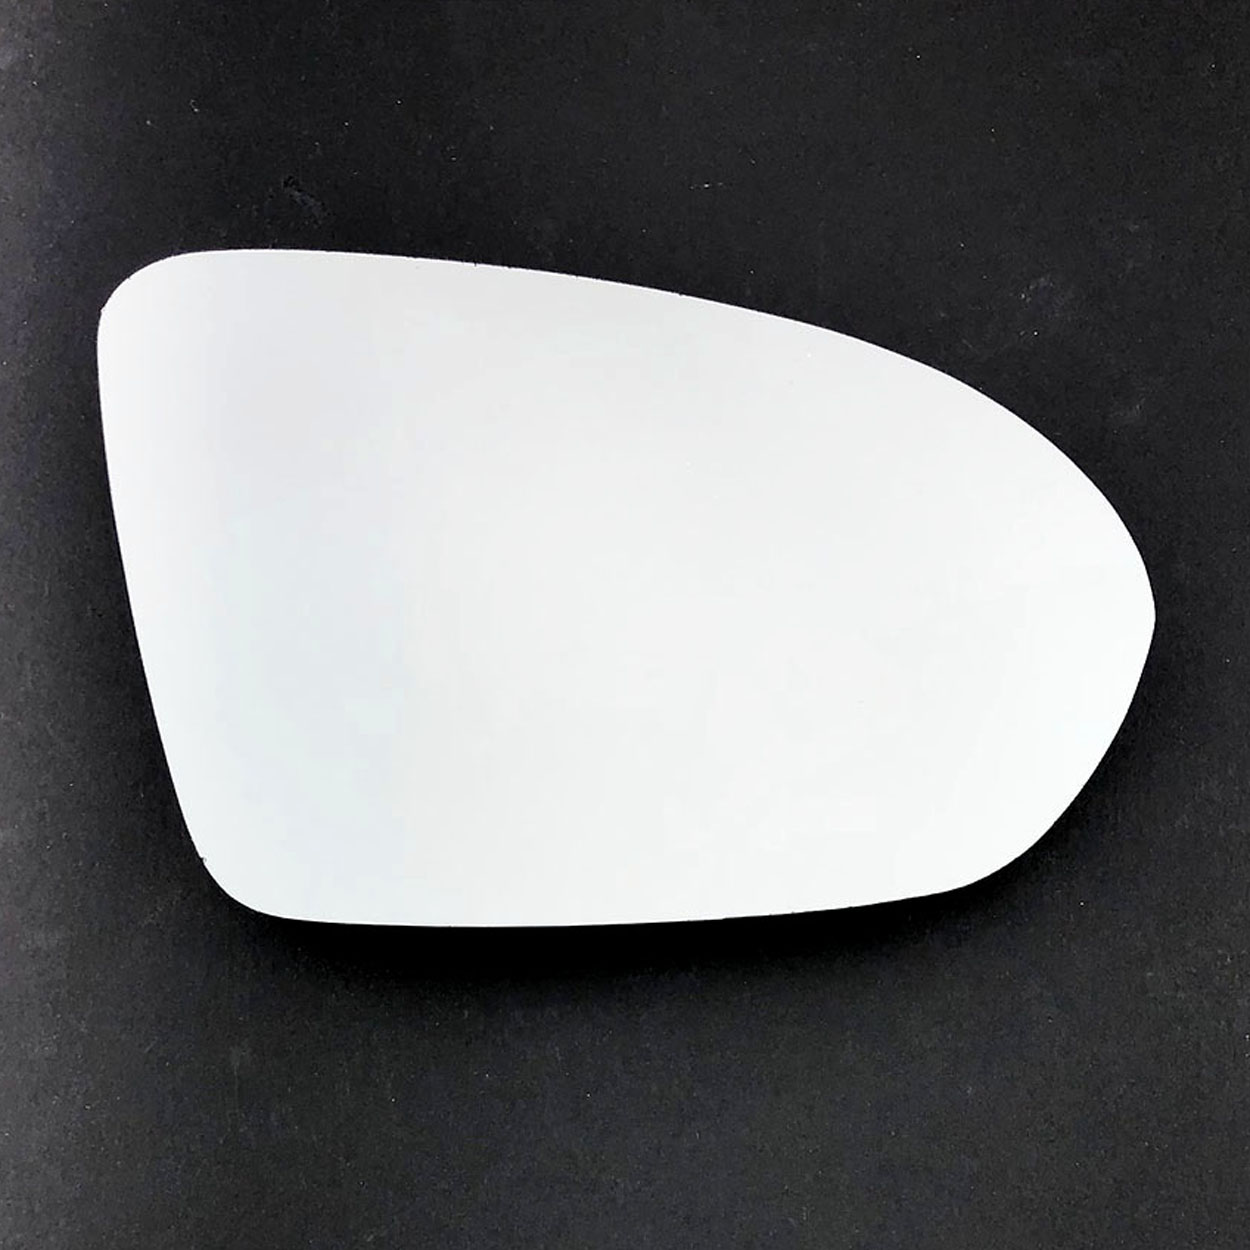 Vauxhall insignia Wing Mirror Glass RIGHT HAND ( UK Driver Side ) 2017 to 2020 – Convex Wing Mirror